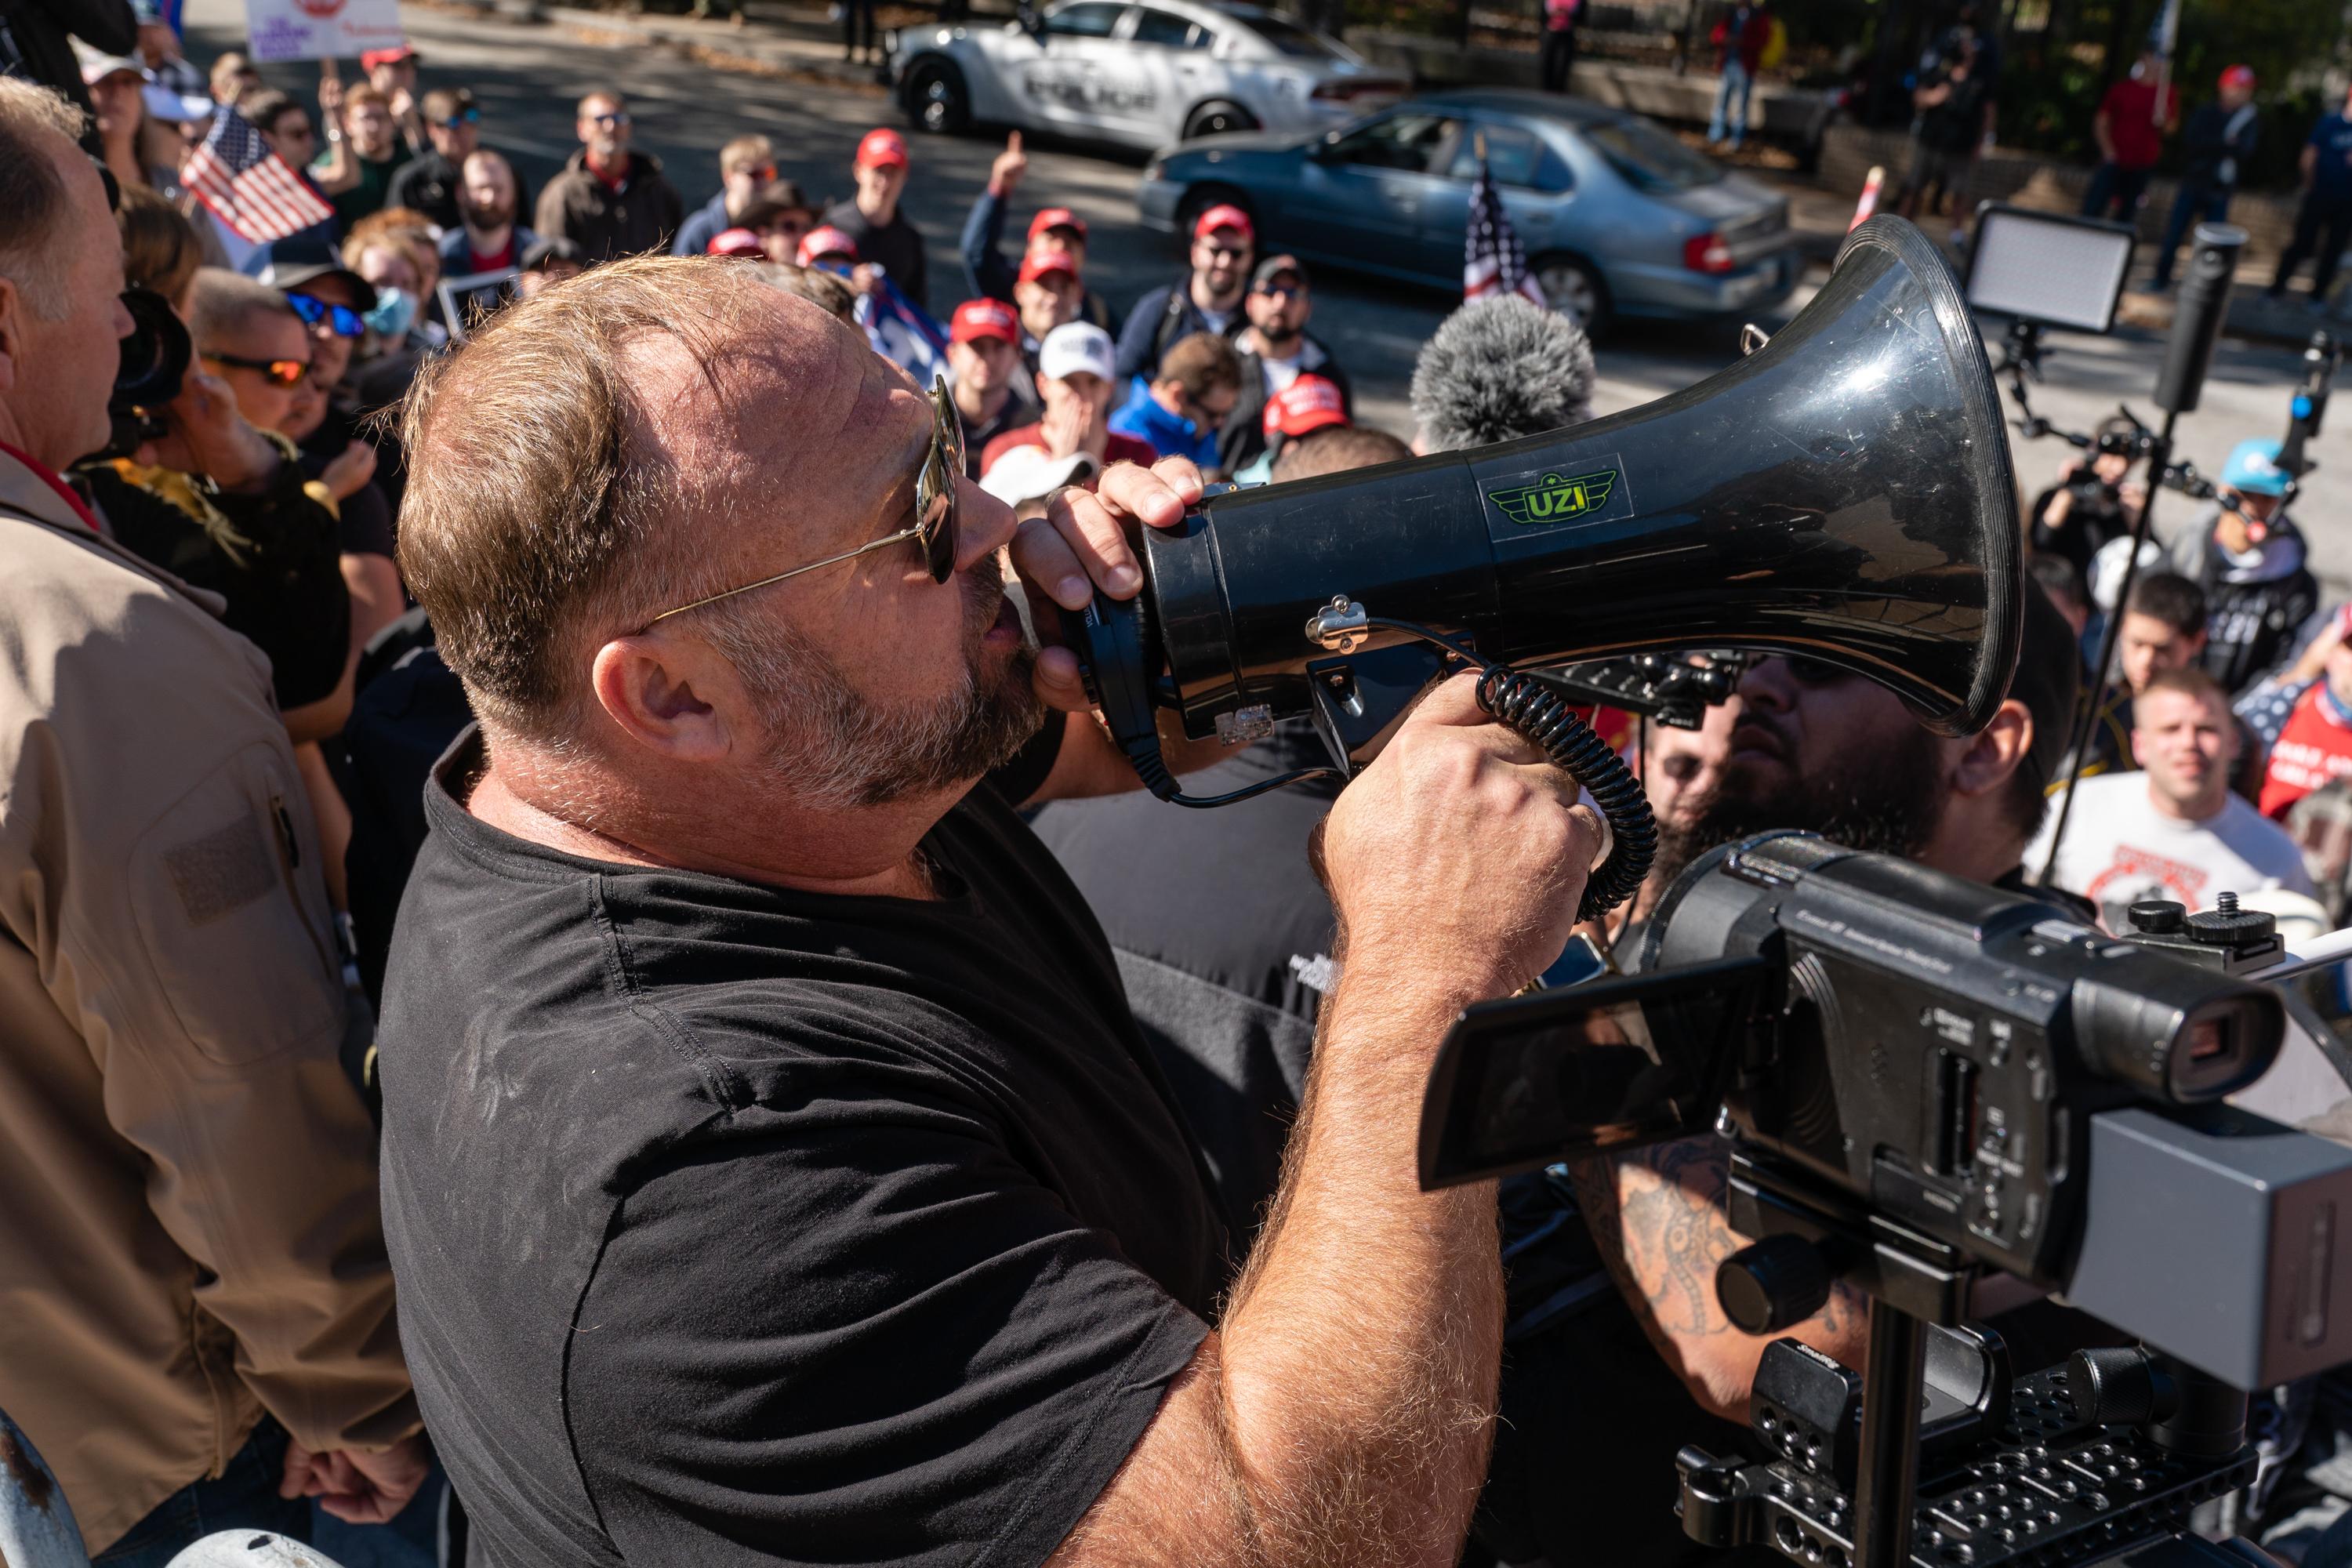 Alex Jones, host of Infowars, an extreme right-wing program that often trafficks in conspiracy theories, speaks during a rally against the results of the U.S. Presidential election outside the Georgia State Capitol on November 18, 2020 in Atlanta, Georgia.